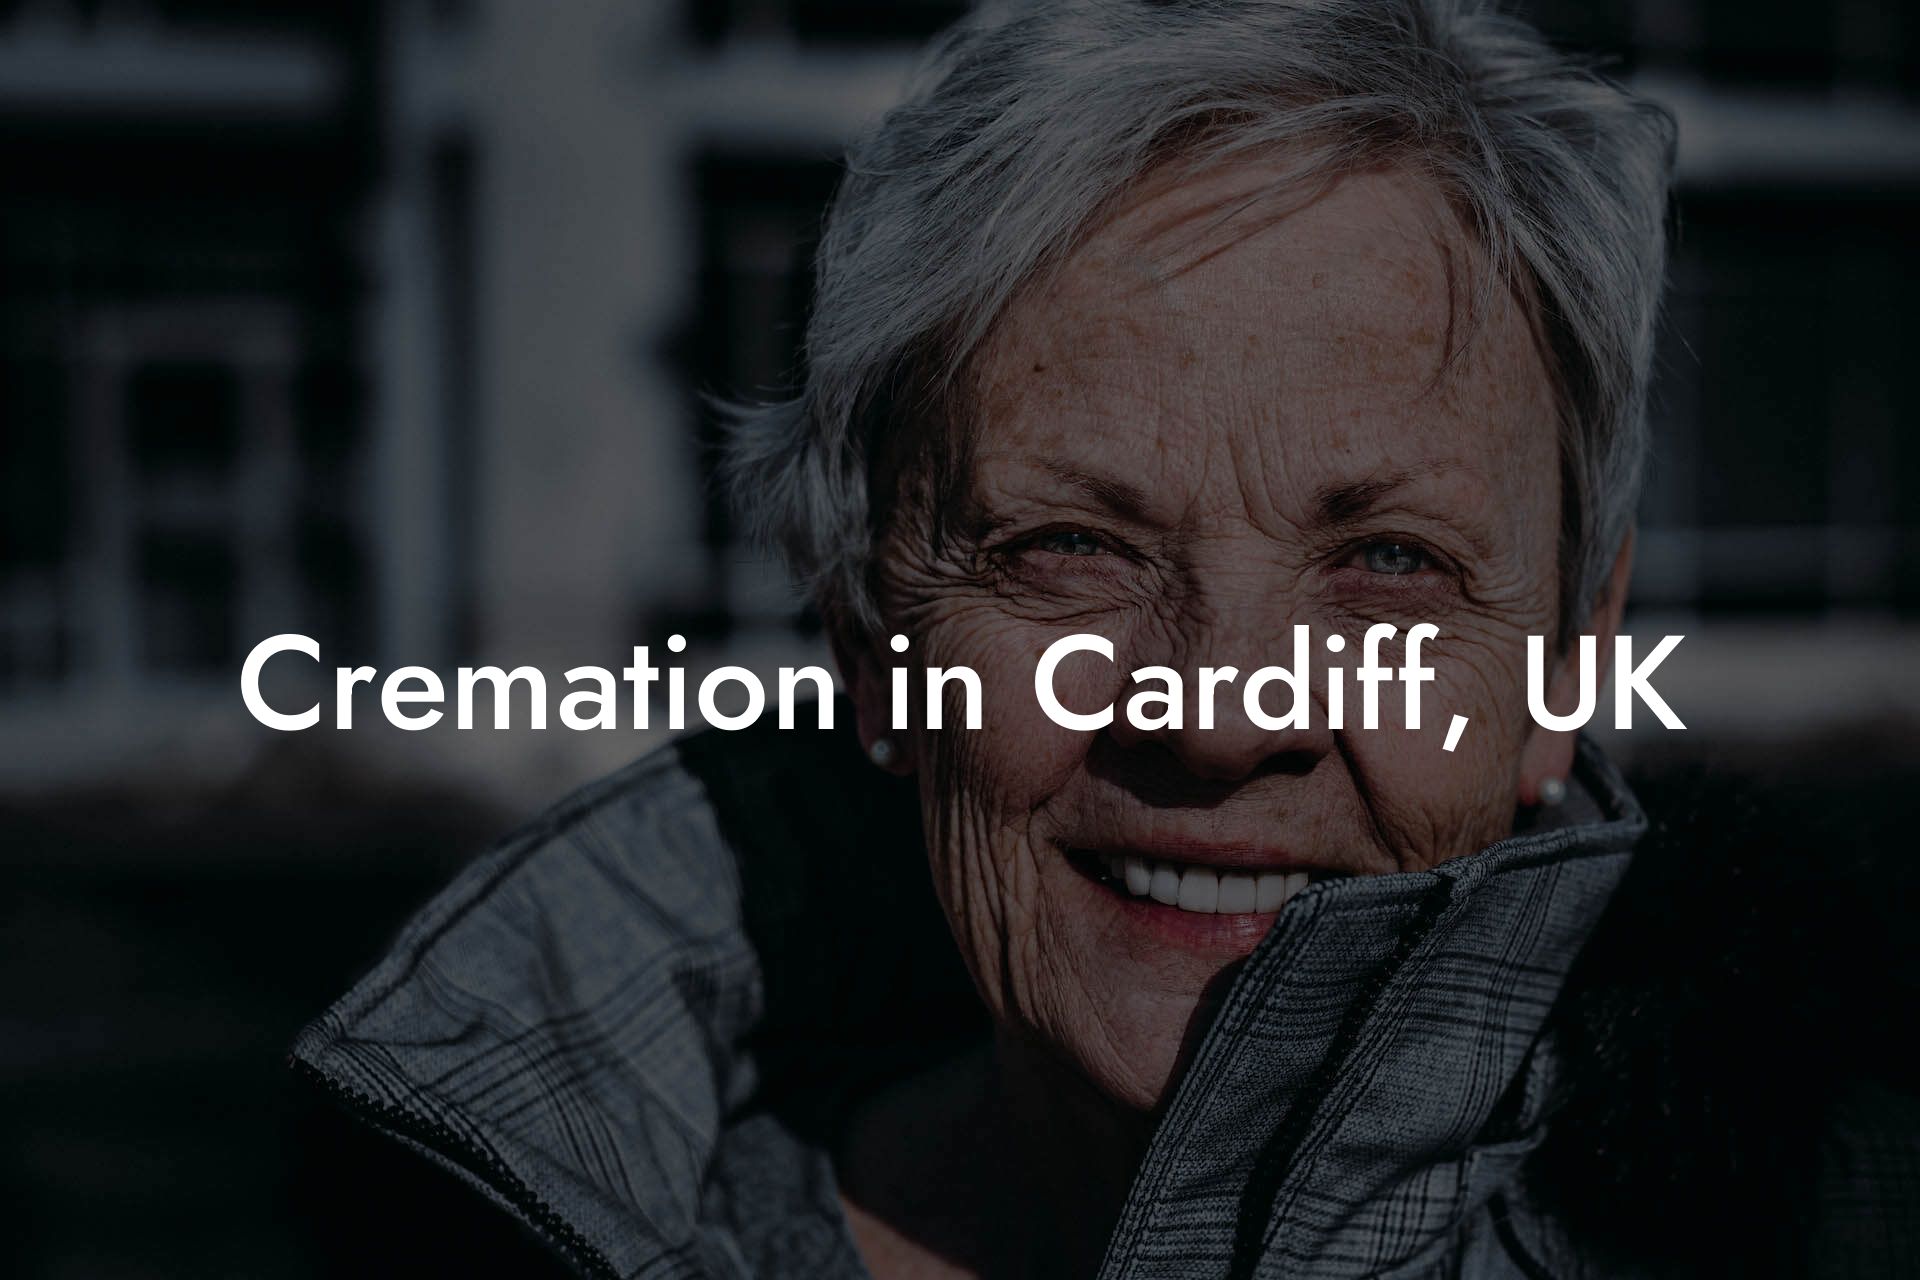 Cremation in Cardiff, UK